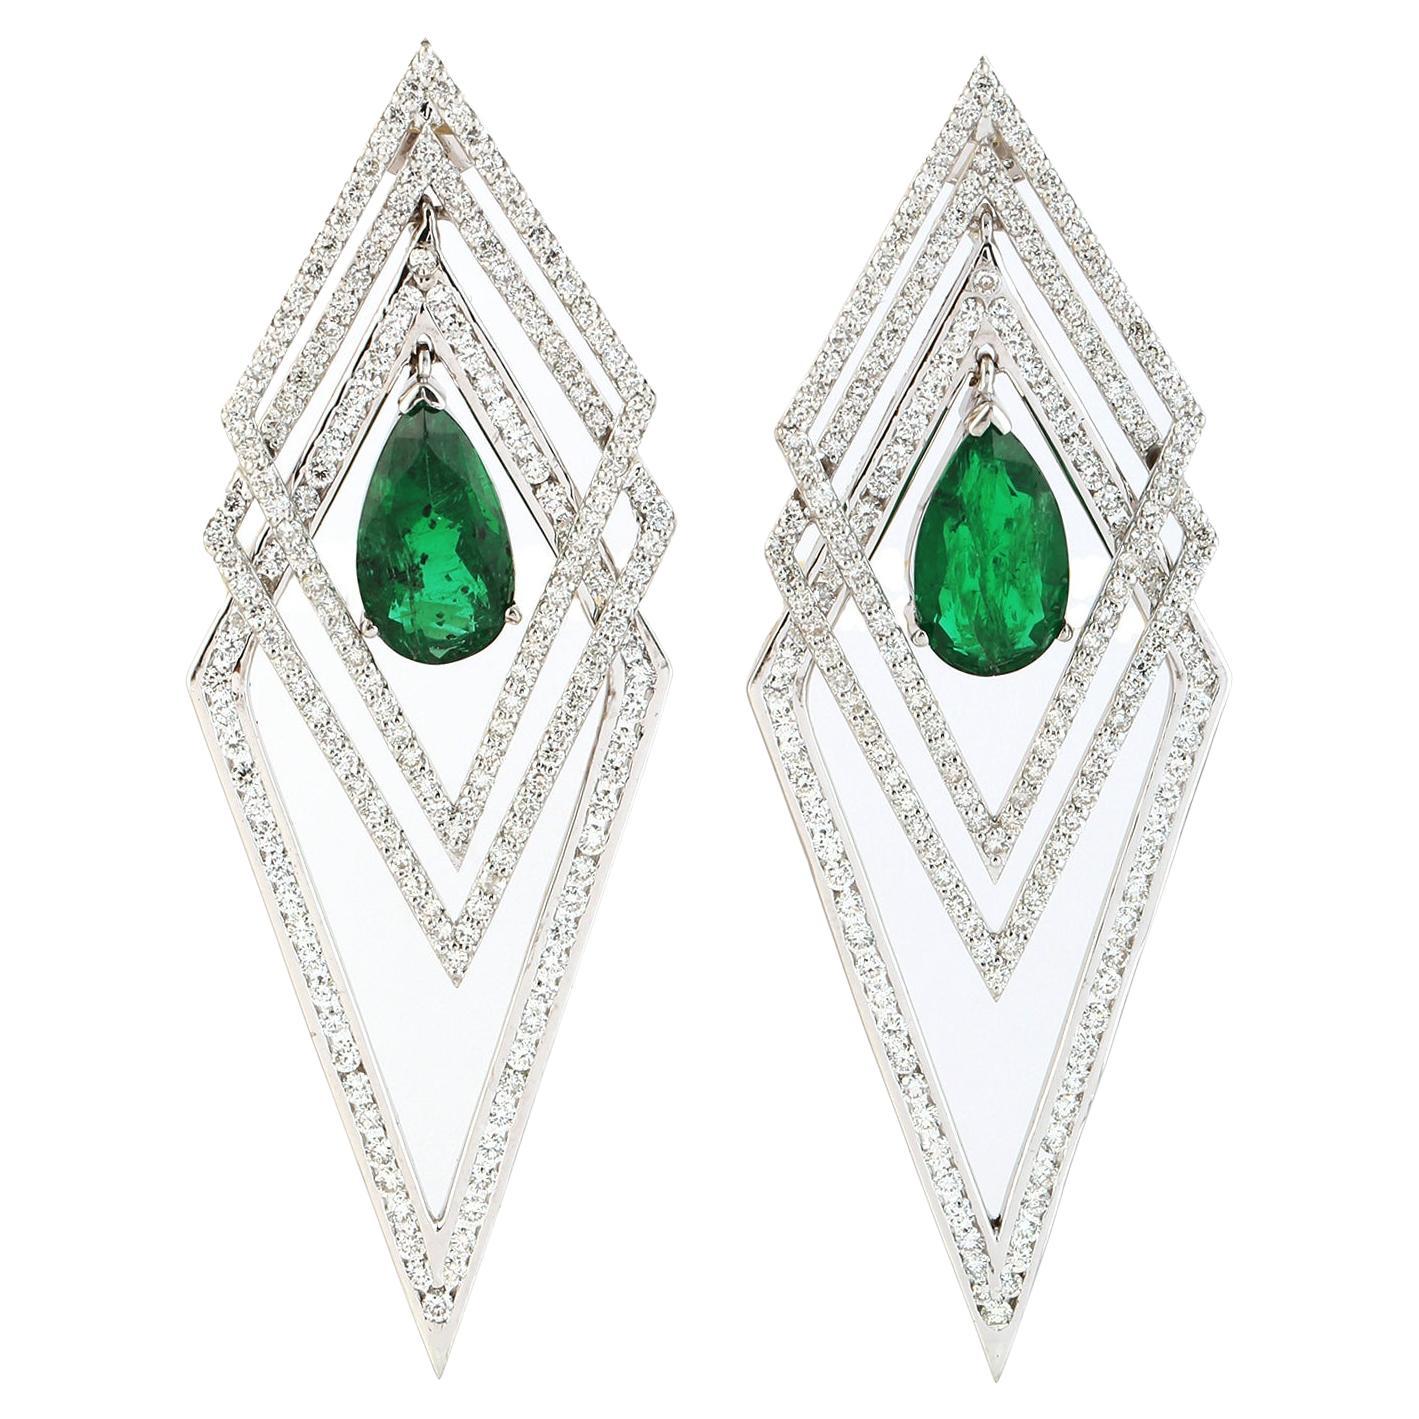 7.06ct Pear Shaped Emerald Dangle Earrings With Diamonds In Rhombus Design For Sale